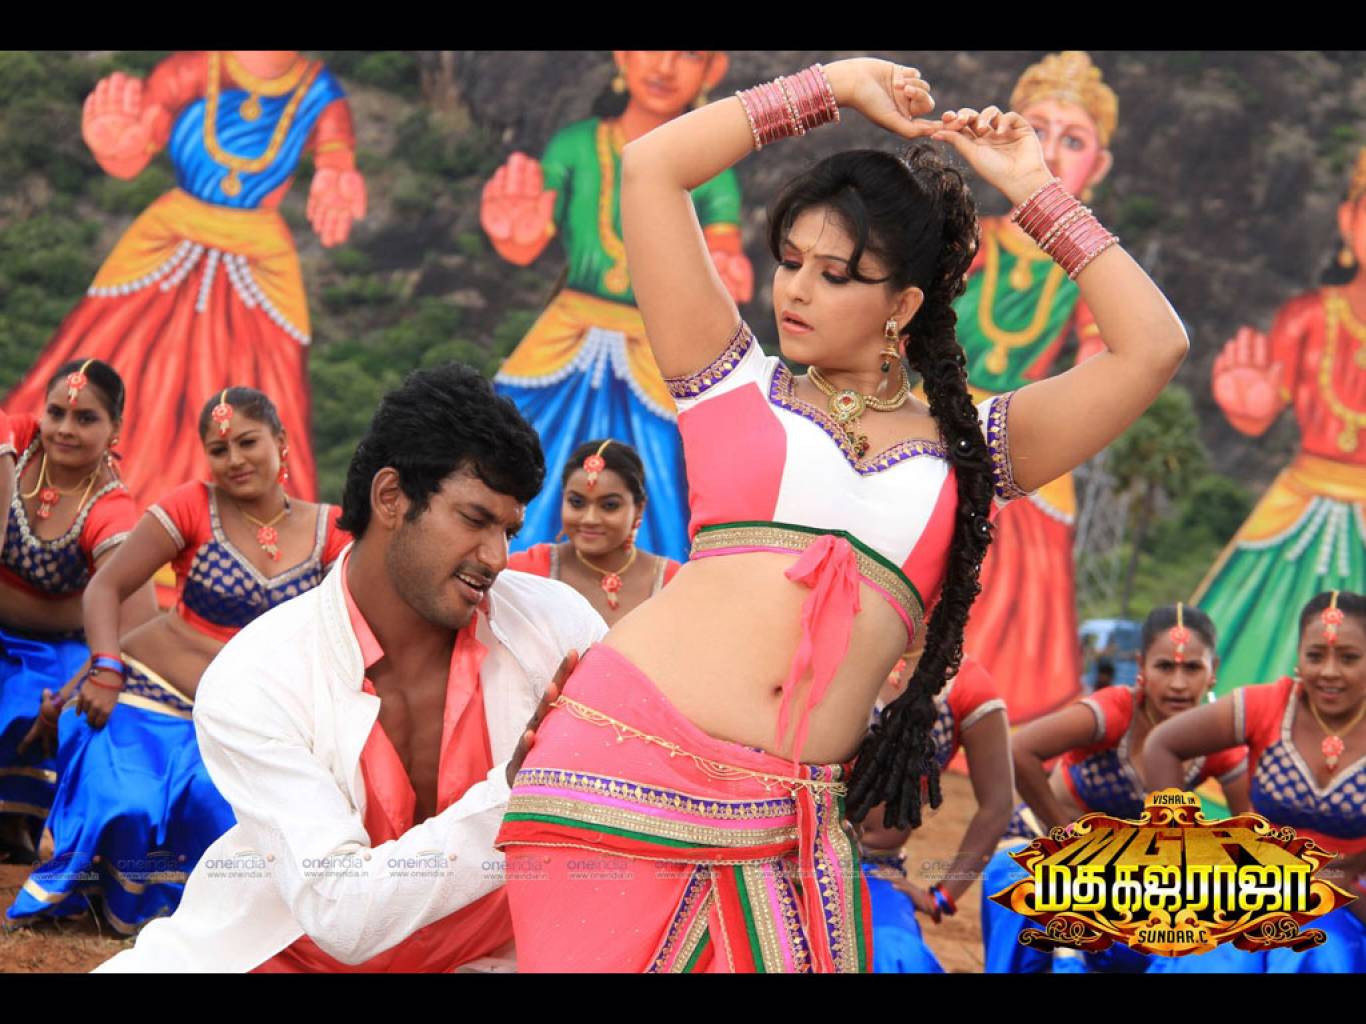 tamil movies hd wallpapers 1080p,abdomen,dancer,navel,song,event